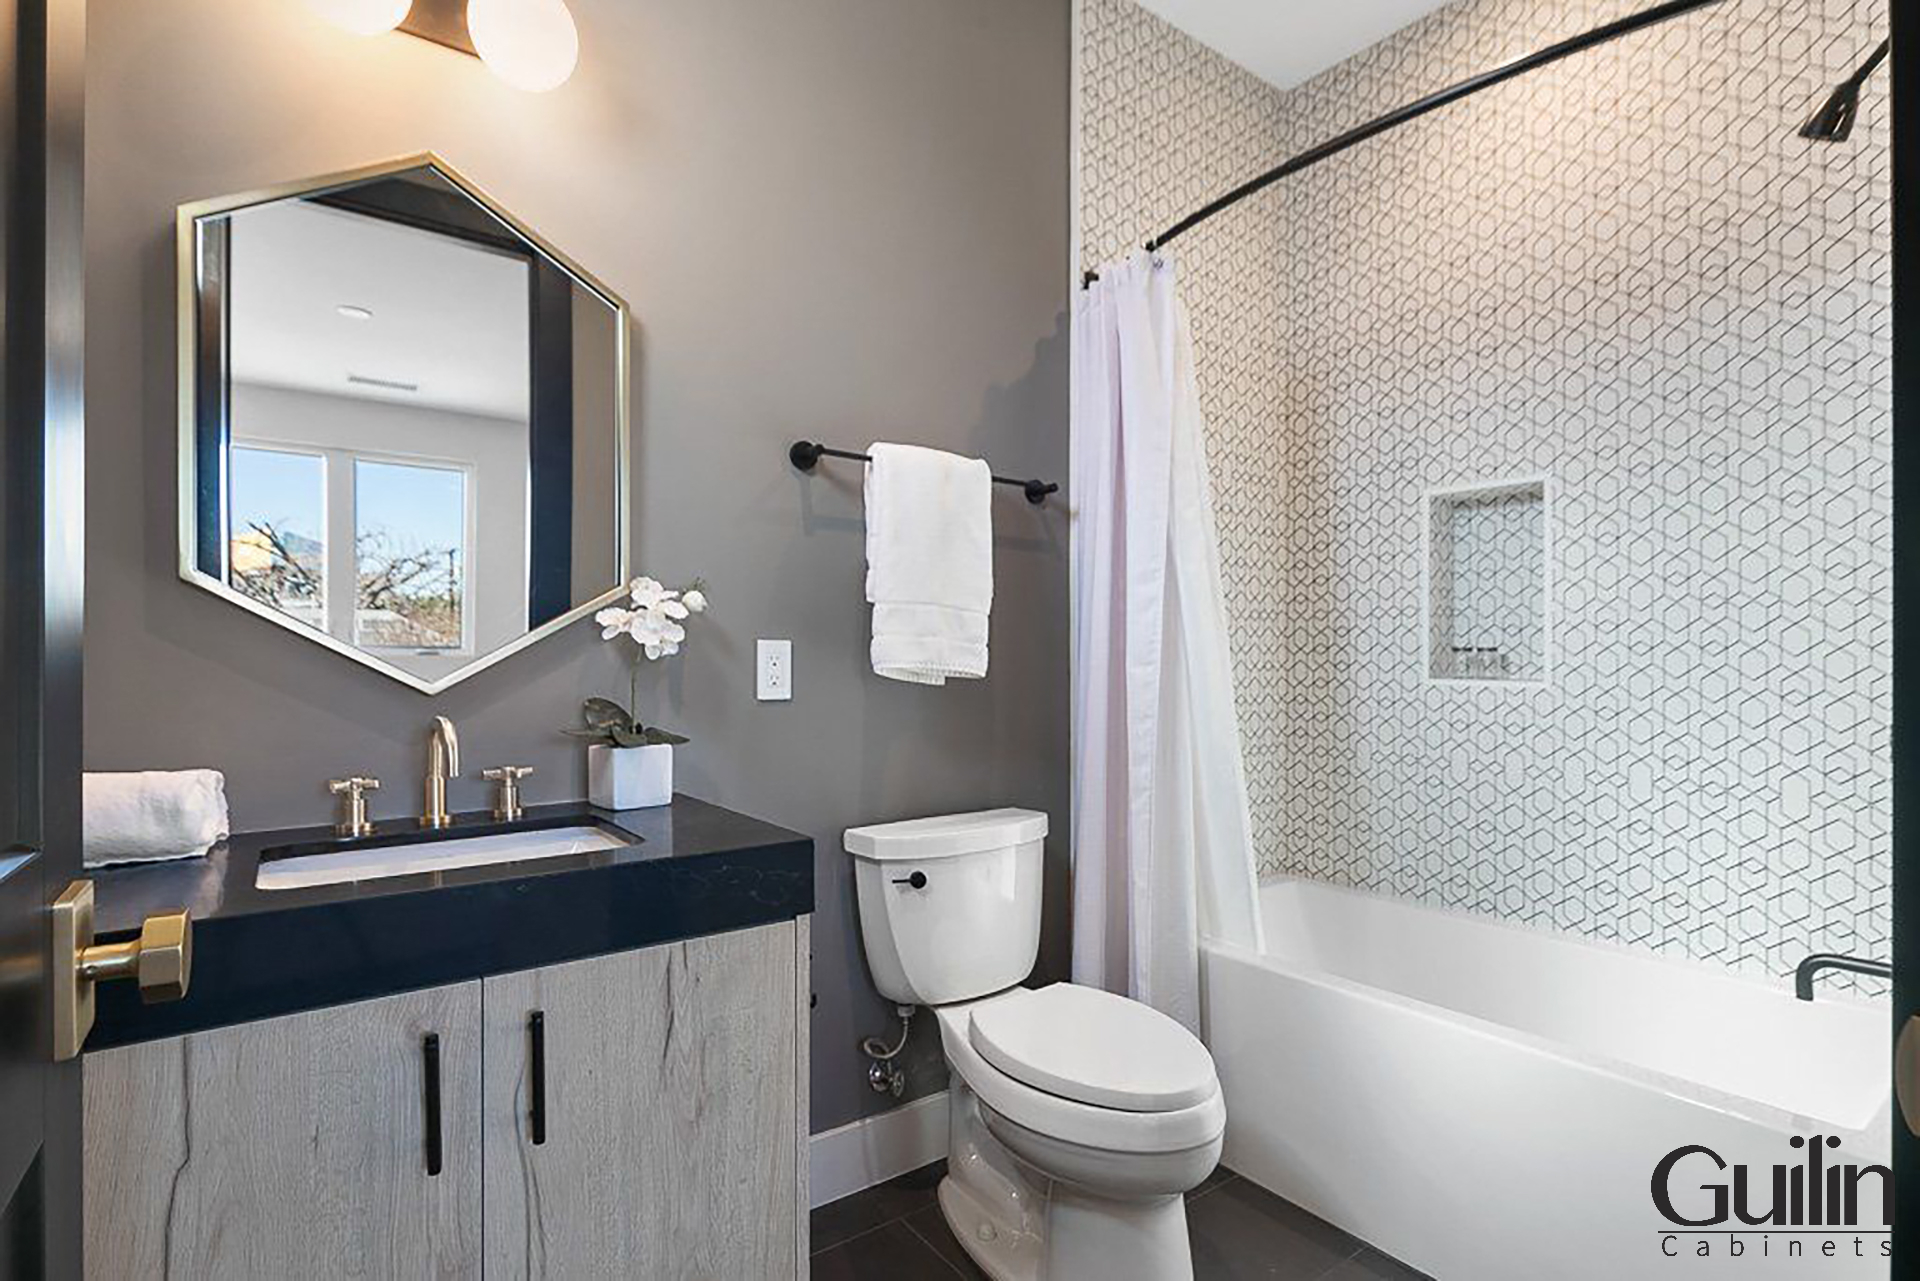 For Medium house, the common powder rooms are about 20 to 30 square feet